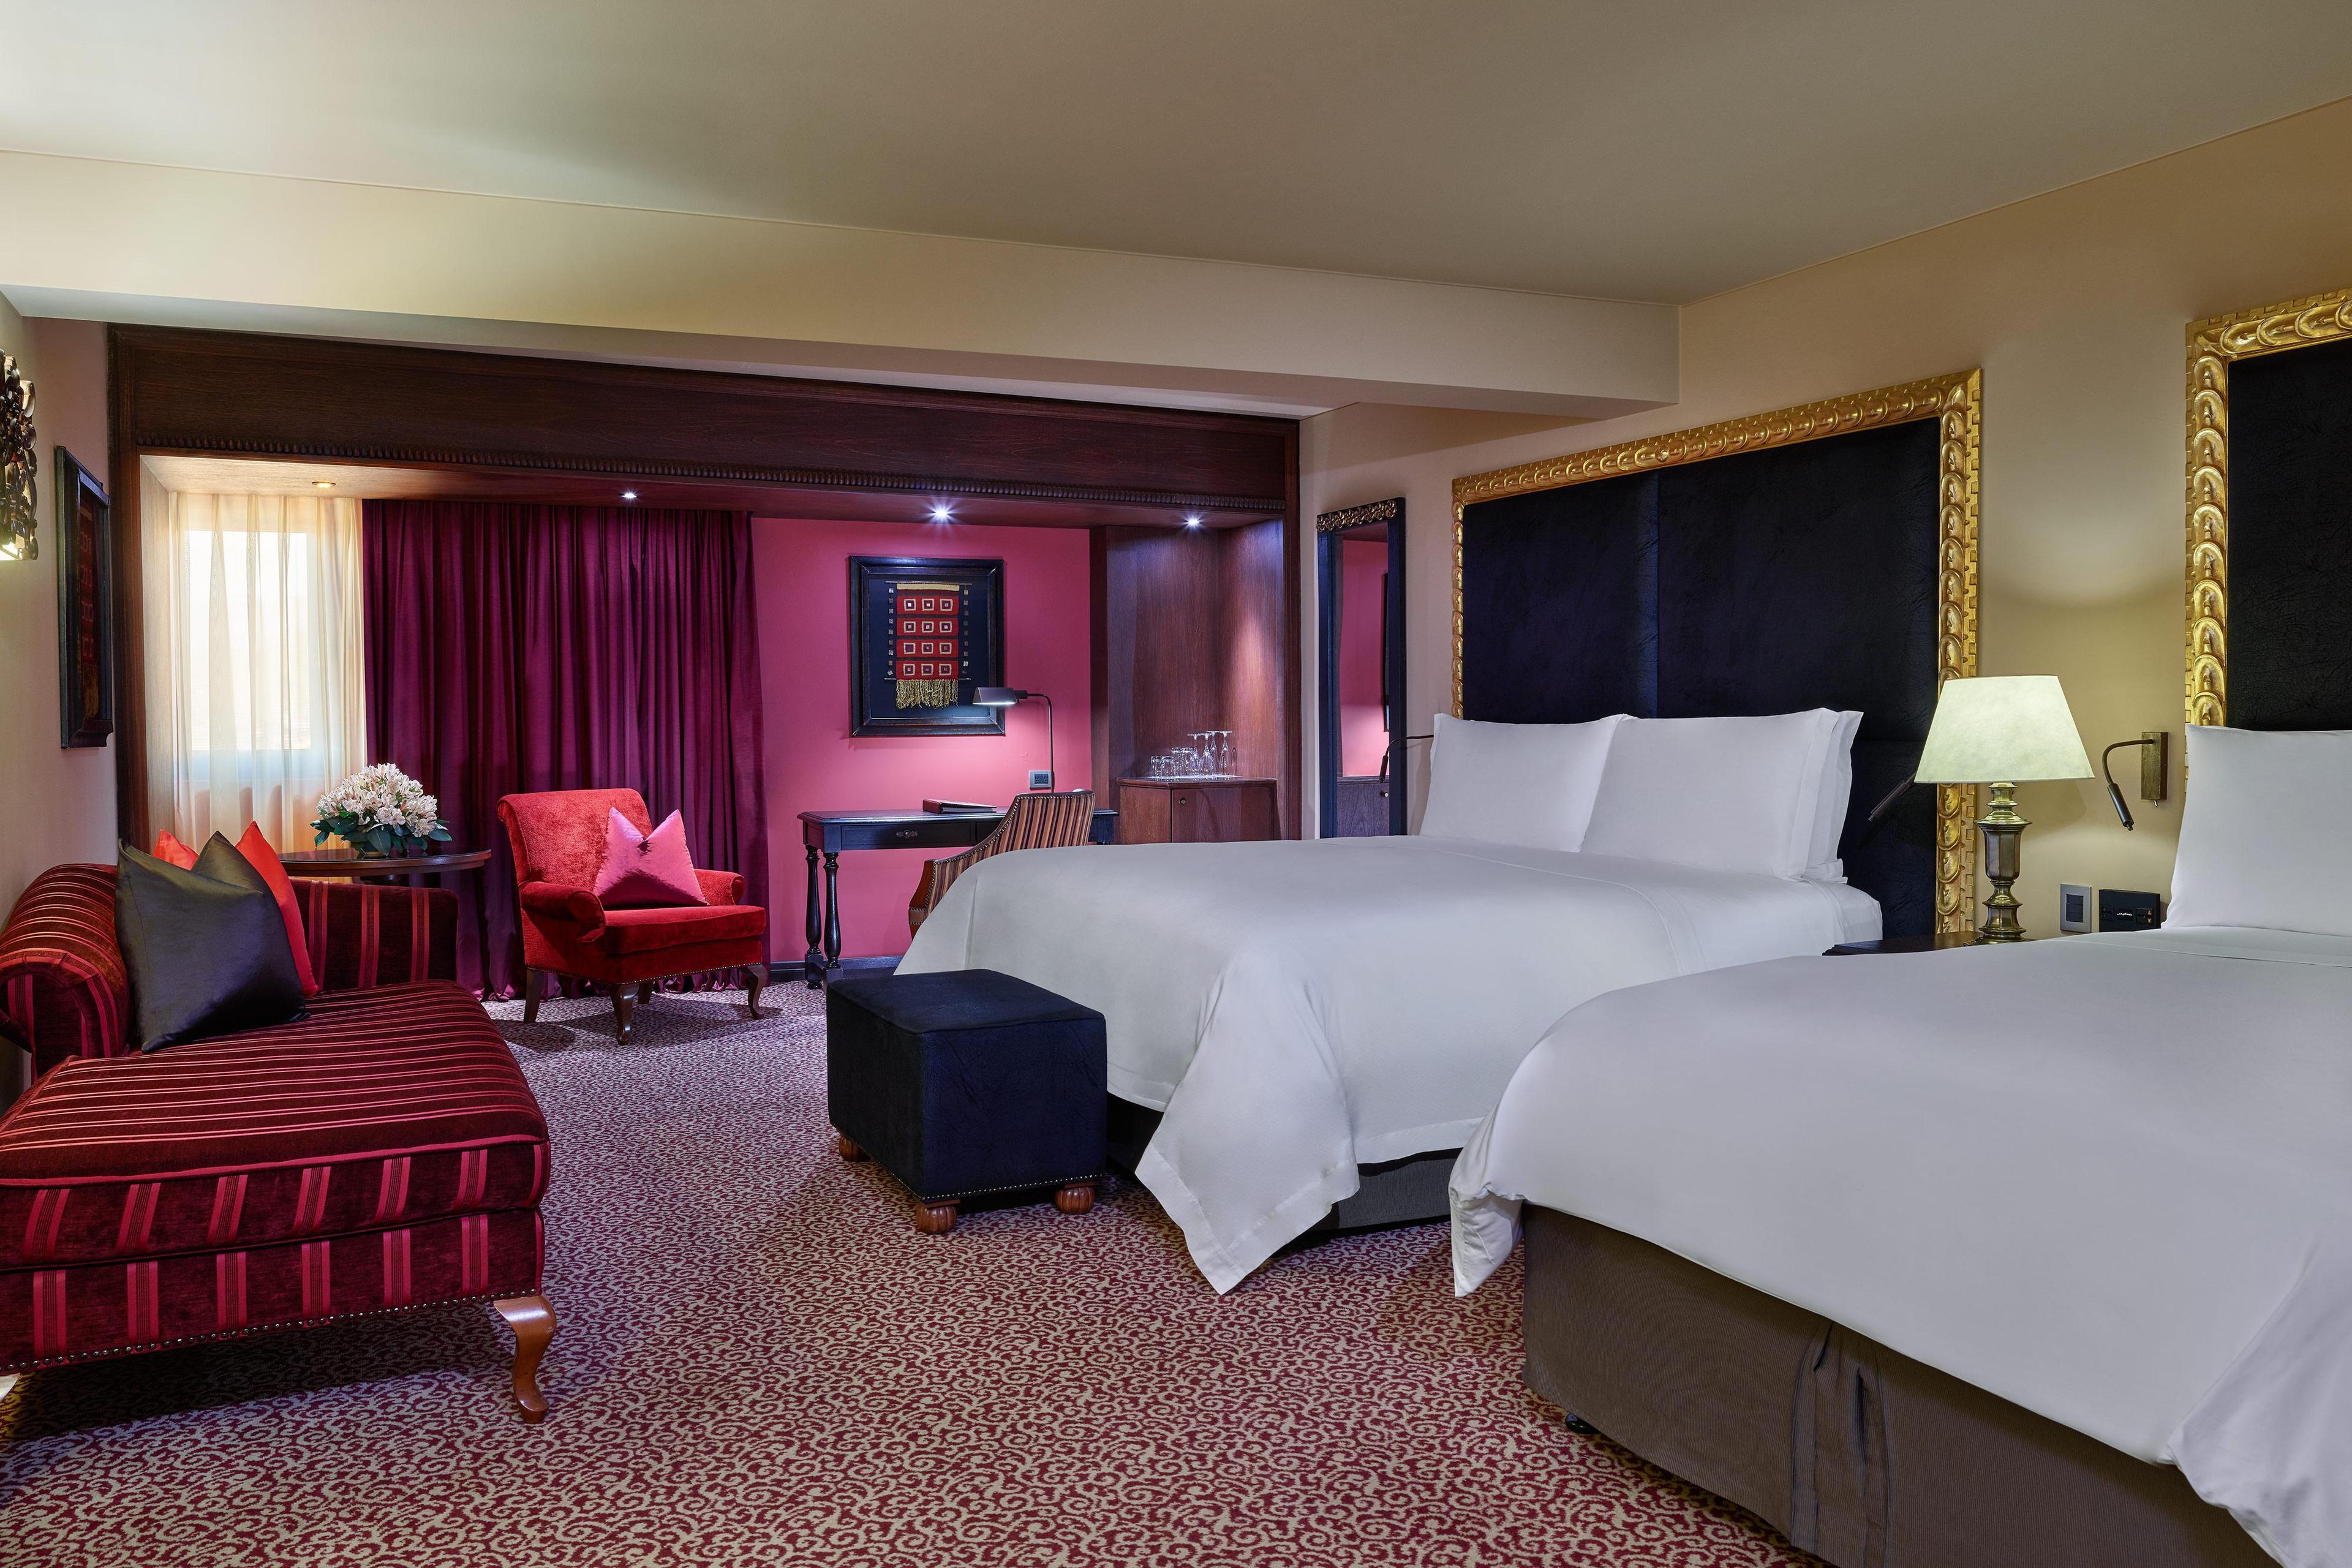 Our Deluxe Guest Room has two double beds for the whole family to relax and unwind in.